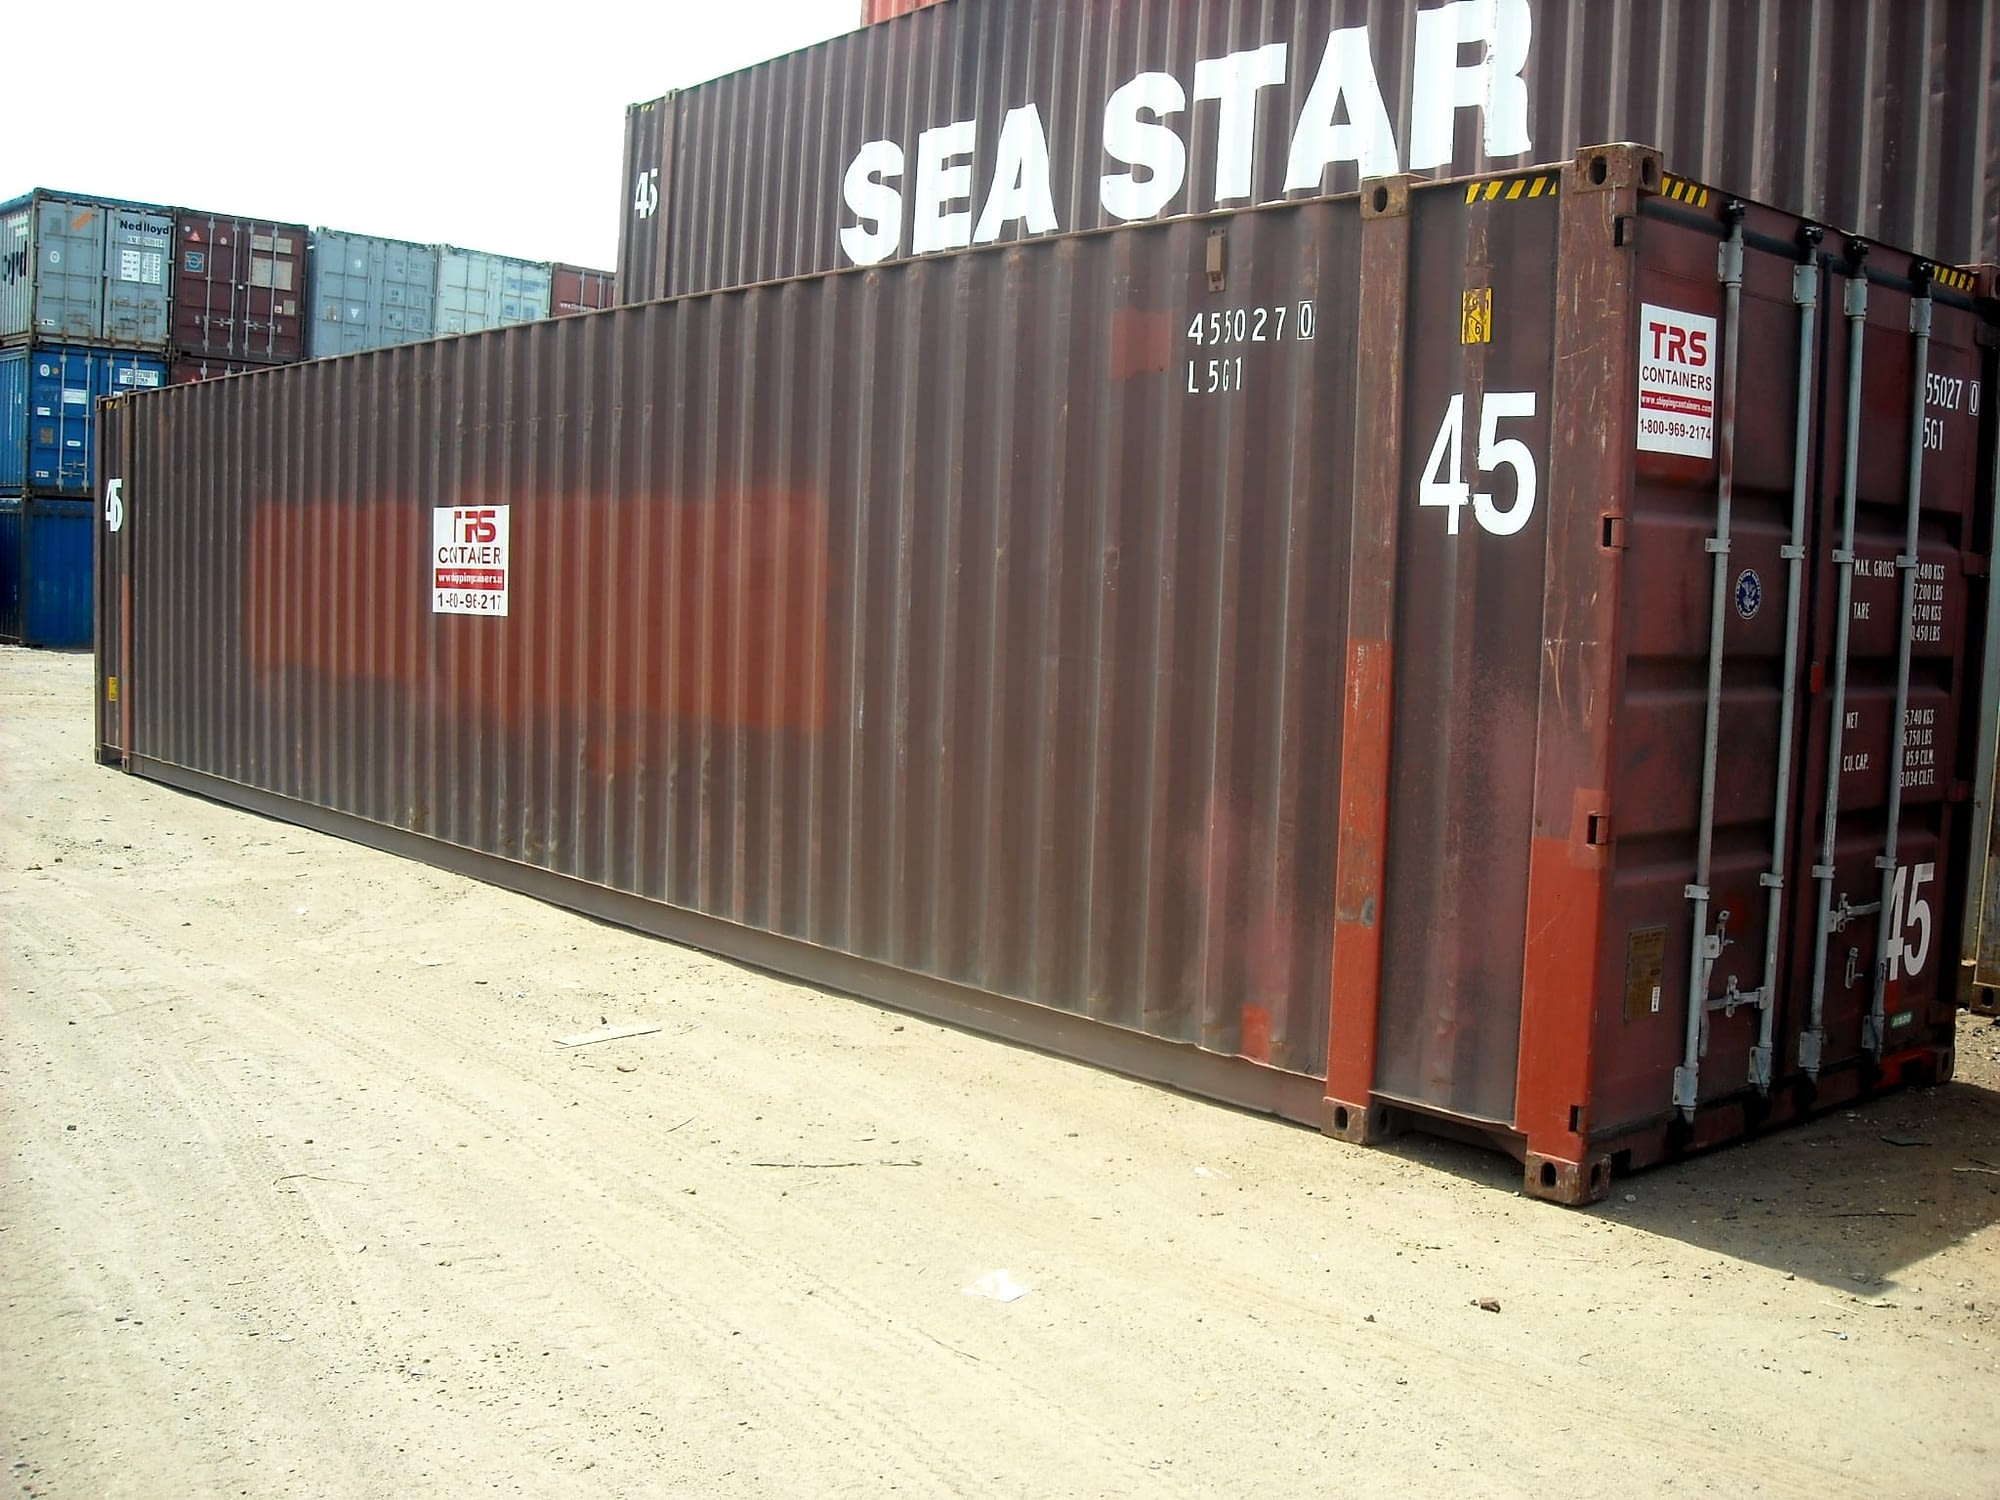 TRS Containers sells and rents 45 foo tlong highcube containers